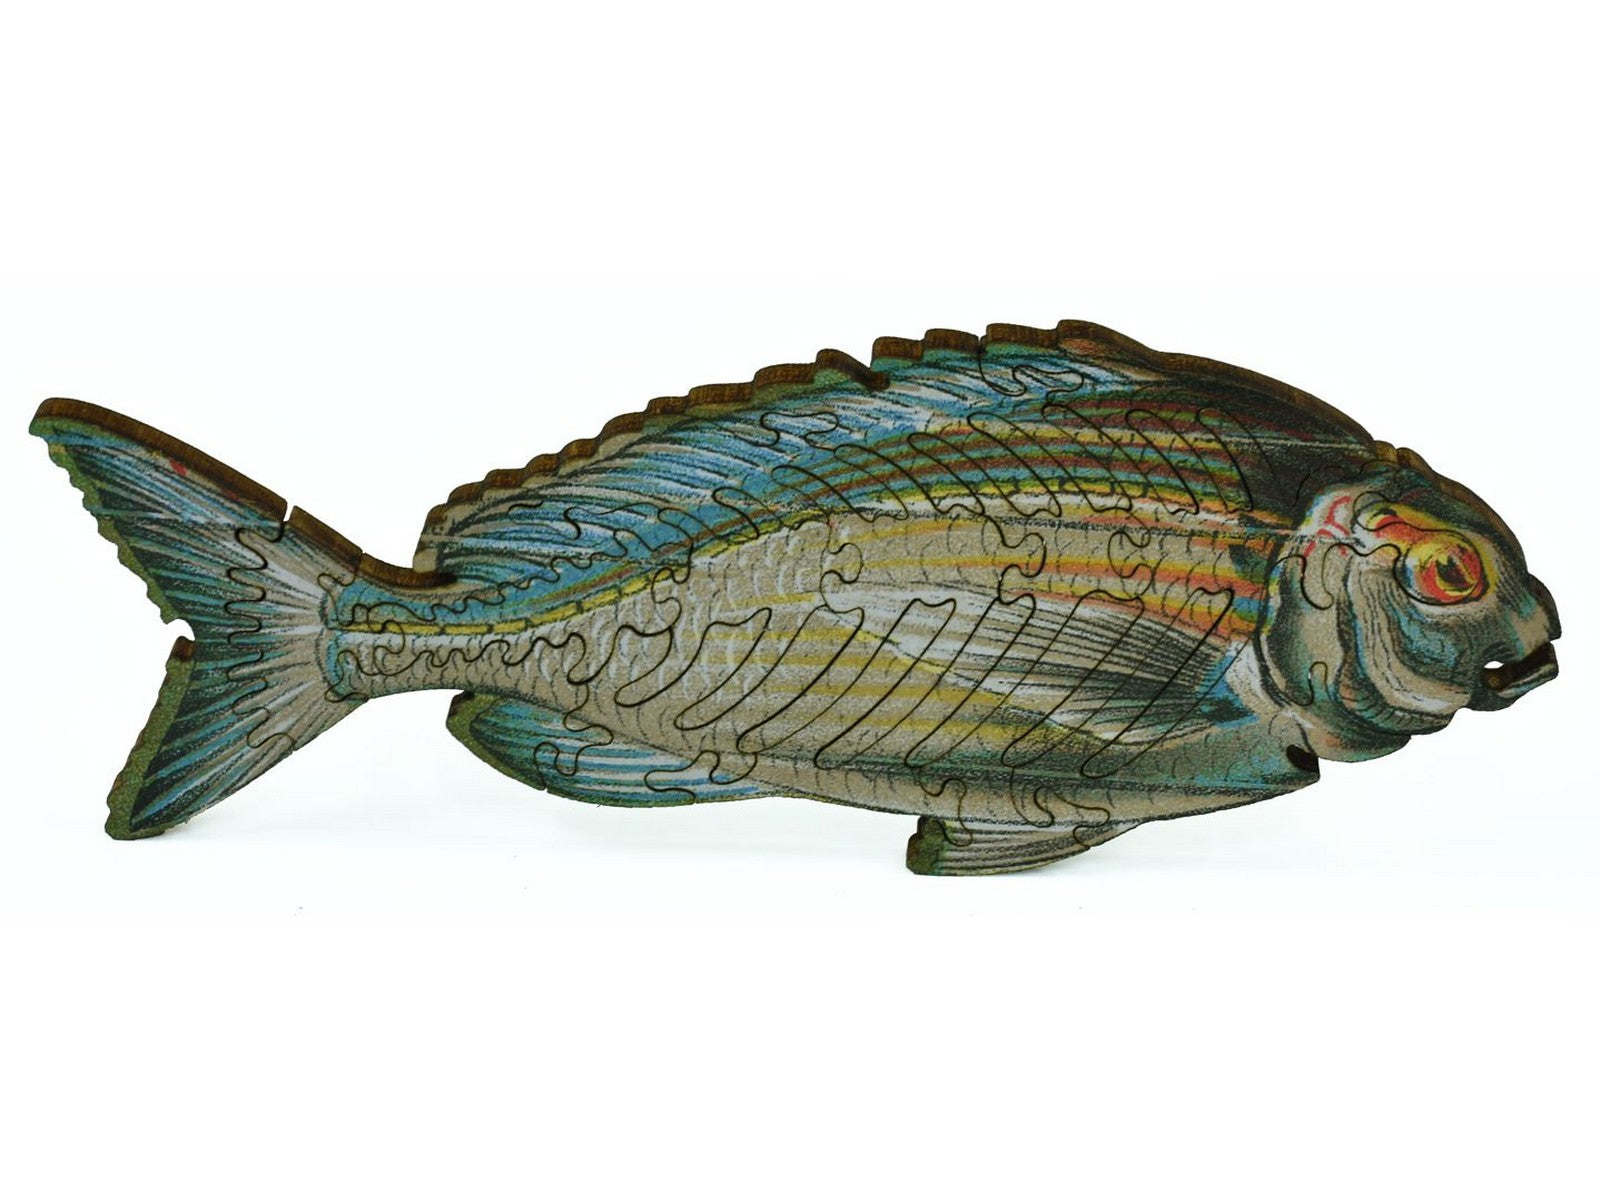 A closeup of pieces showing a large multi-piece fish from the front.